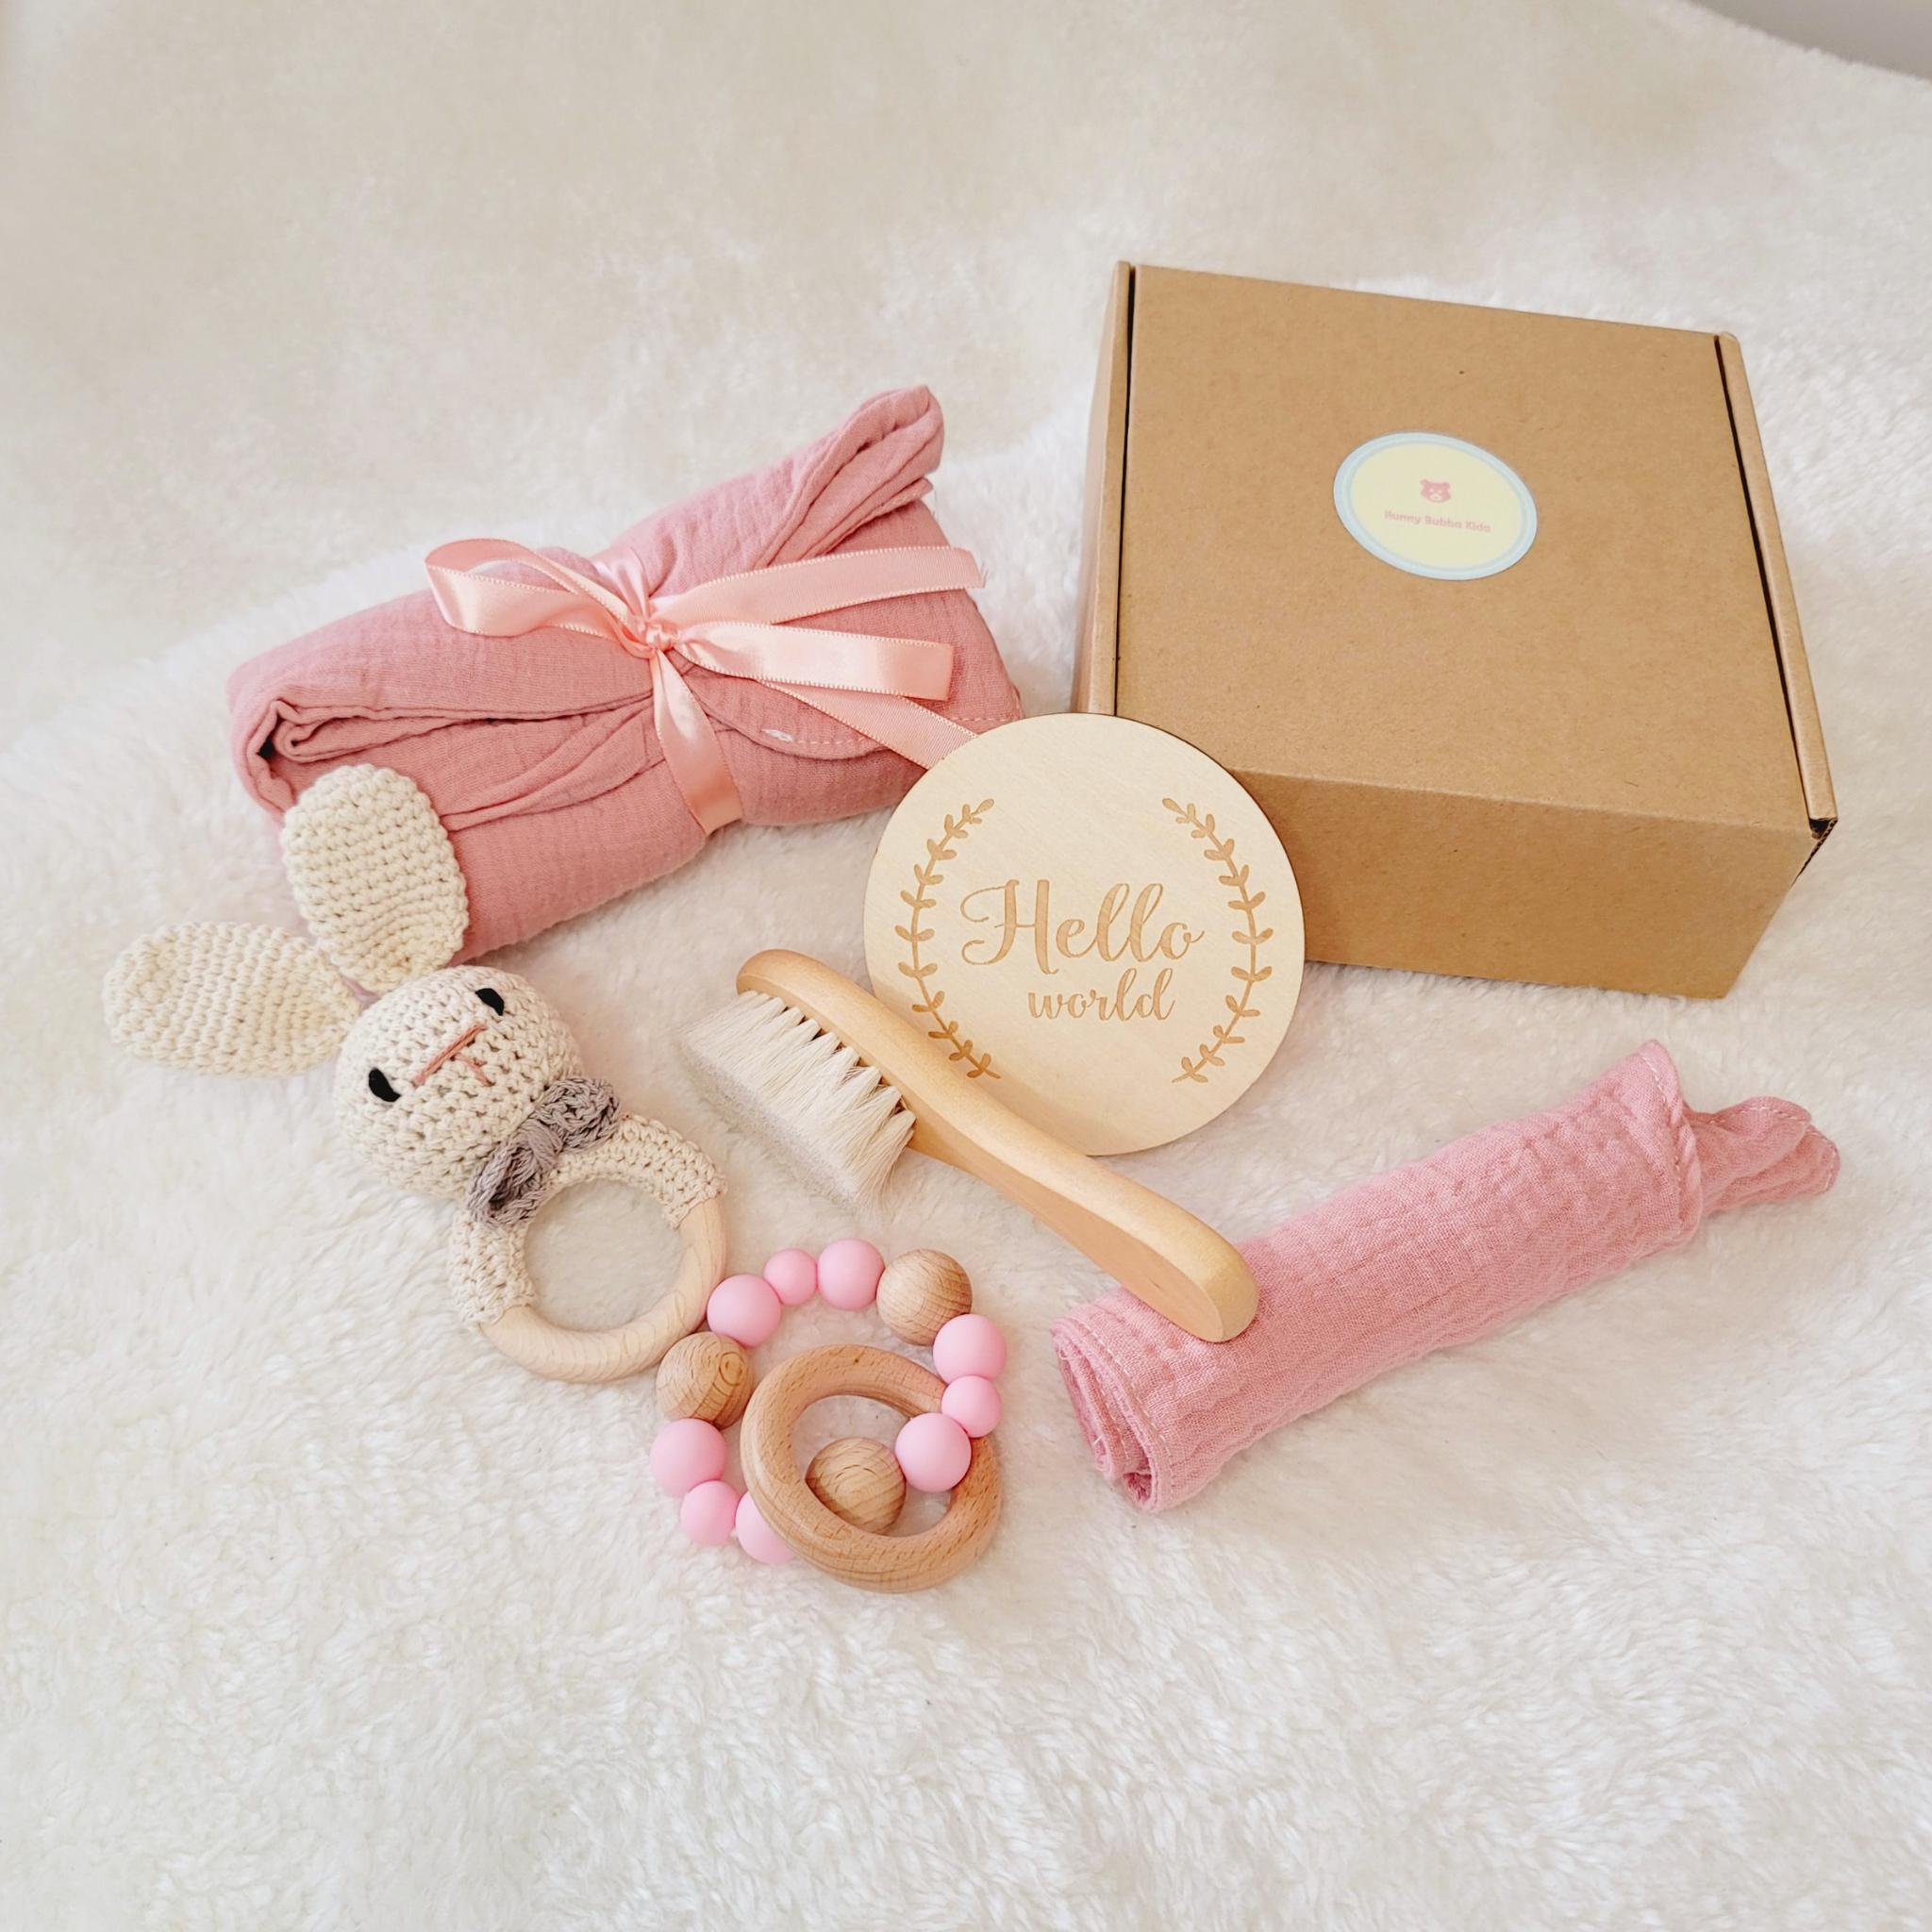 Amazon.com : New Baby Gift Set for Newborn Boy – 2 Blue Keepsake Boxes with  Baby Clothes, Teddy Bear and Newborn Essentials - New Baby Gift Basket for  Parents Makes a Unique